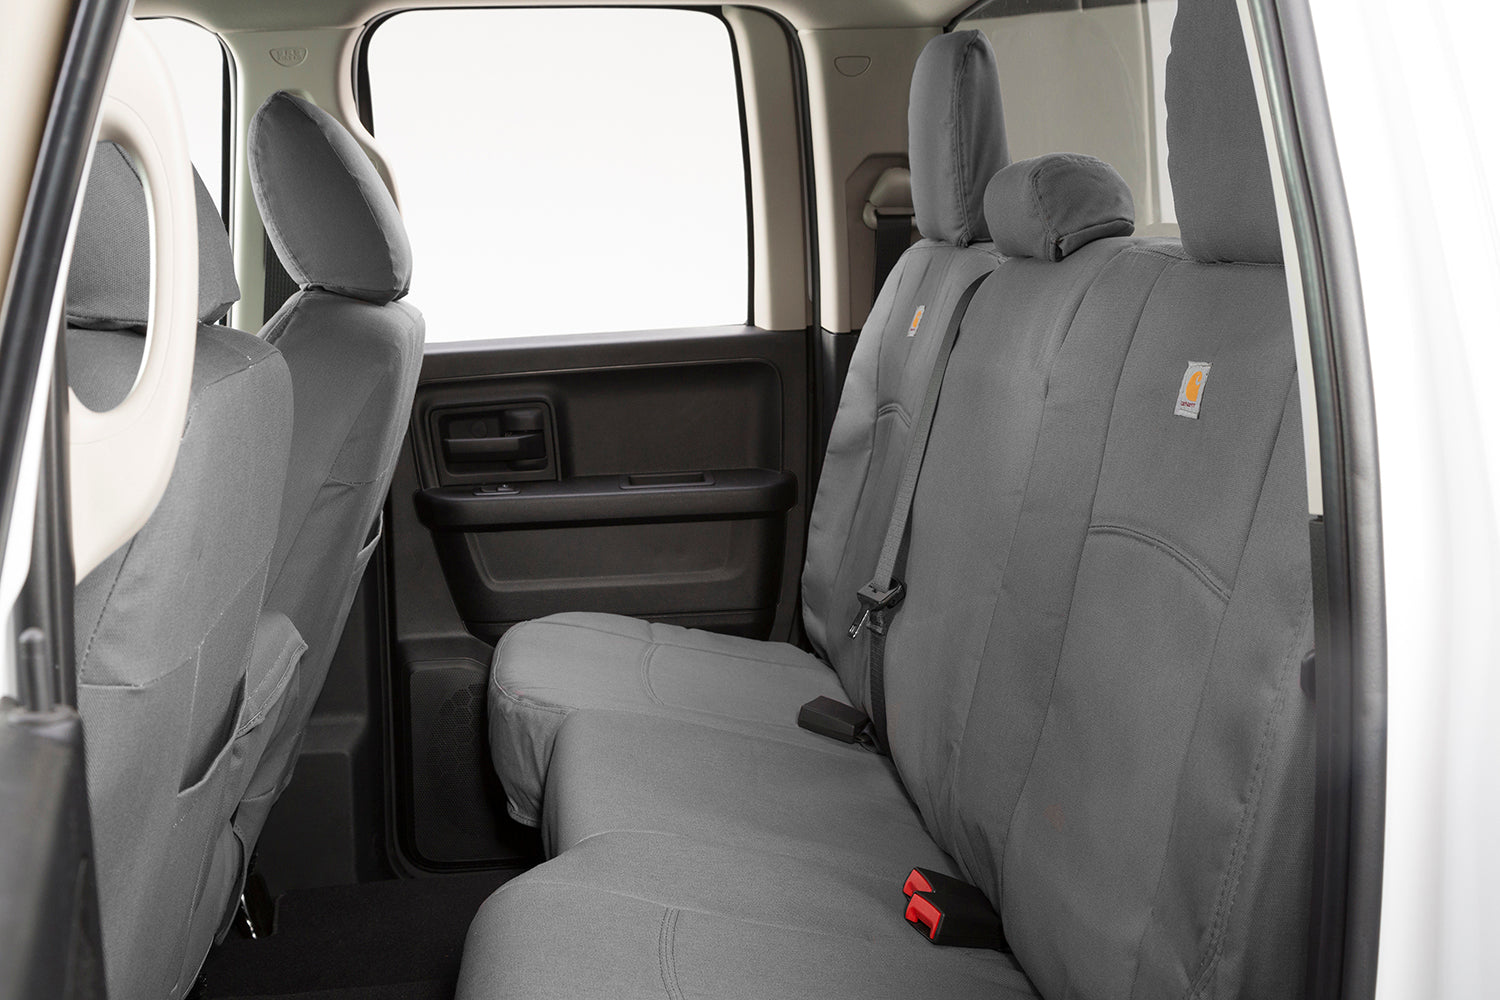 Covercraft Precision Fit Carhartt Second Row S for Ford F-150